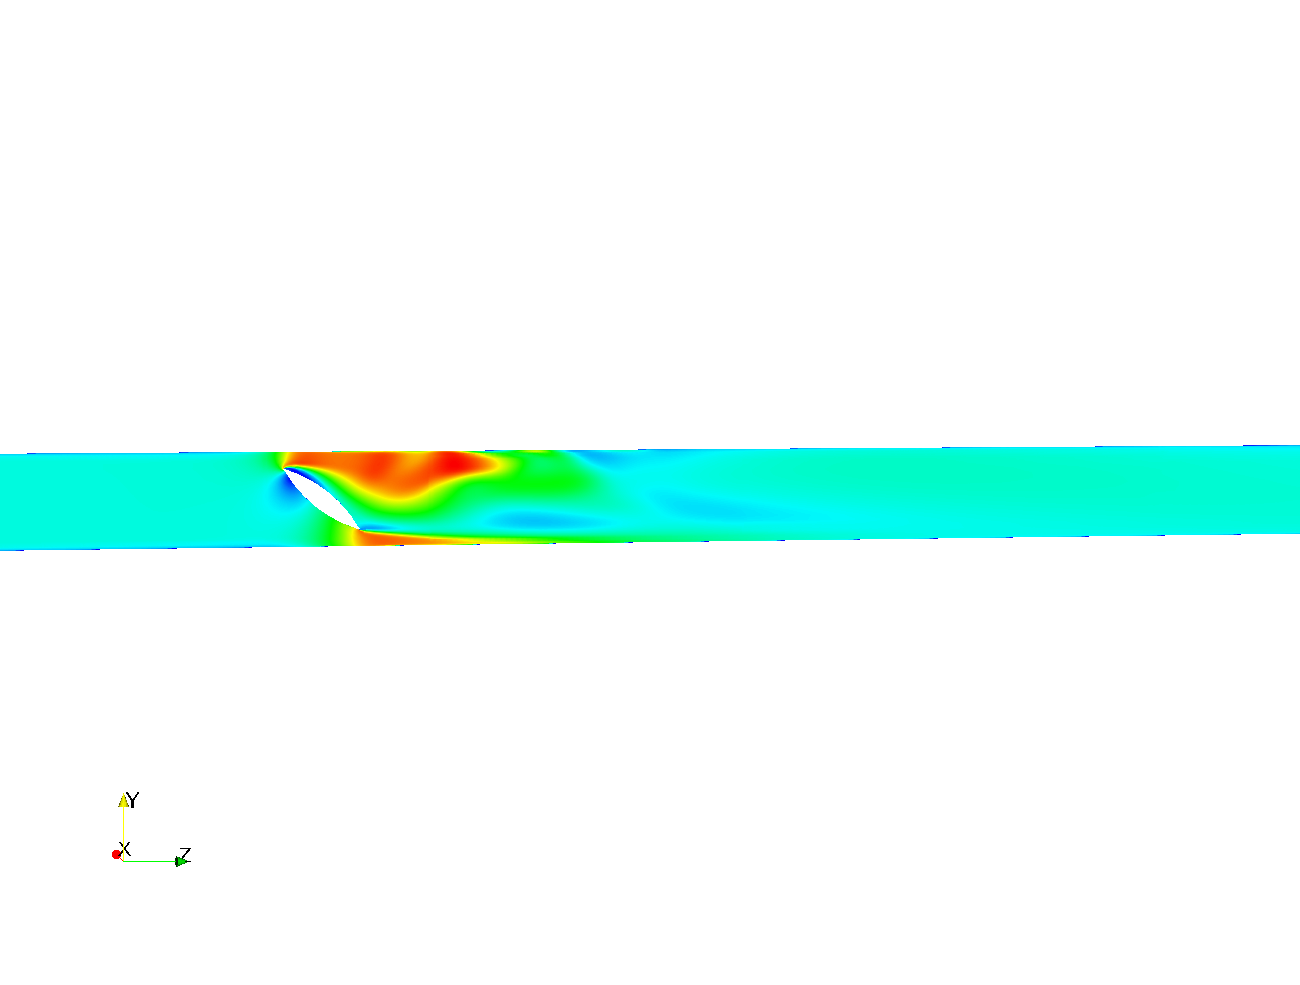 Butterfly Valve  Flow  withCFD image